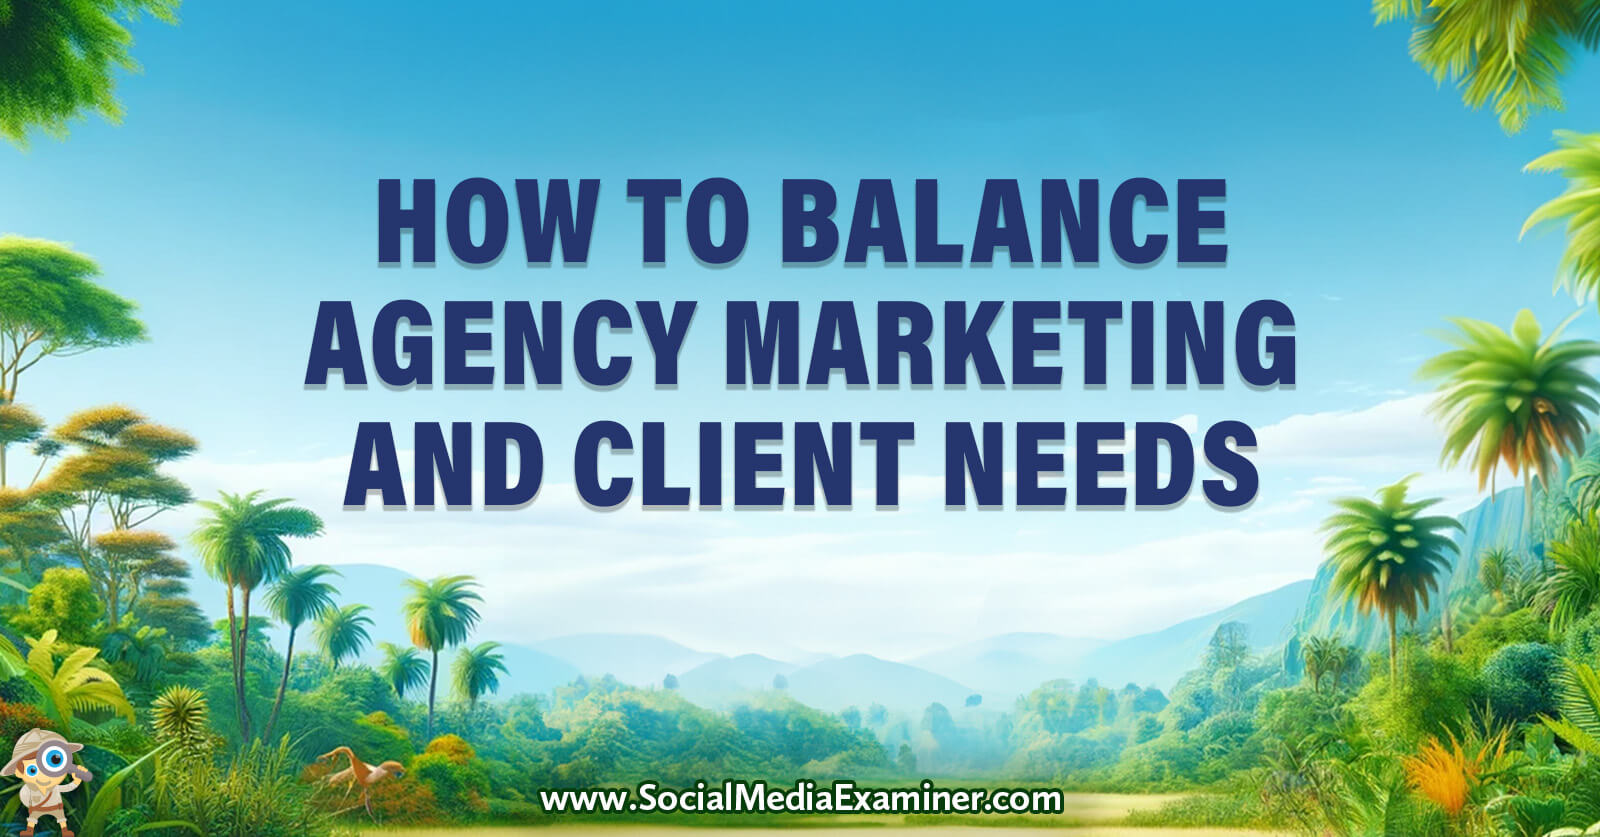 How to Balance Agency Marketing and Client Needs by Social Media Examiner